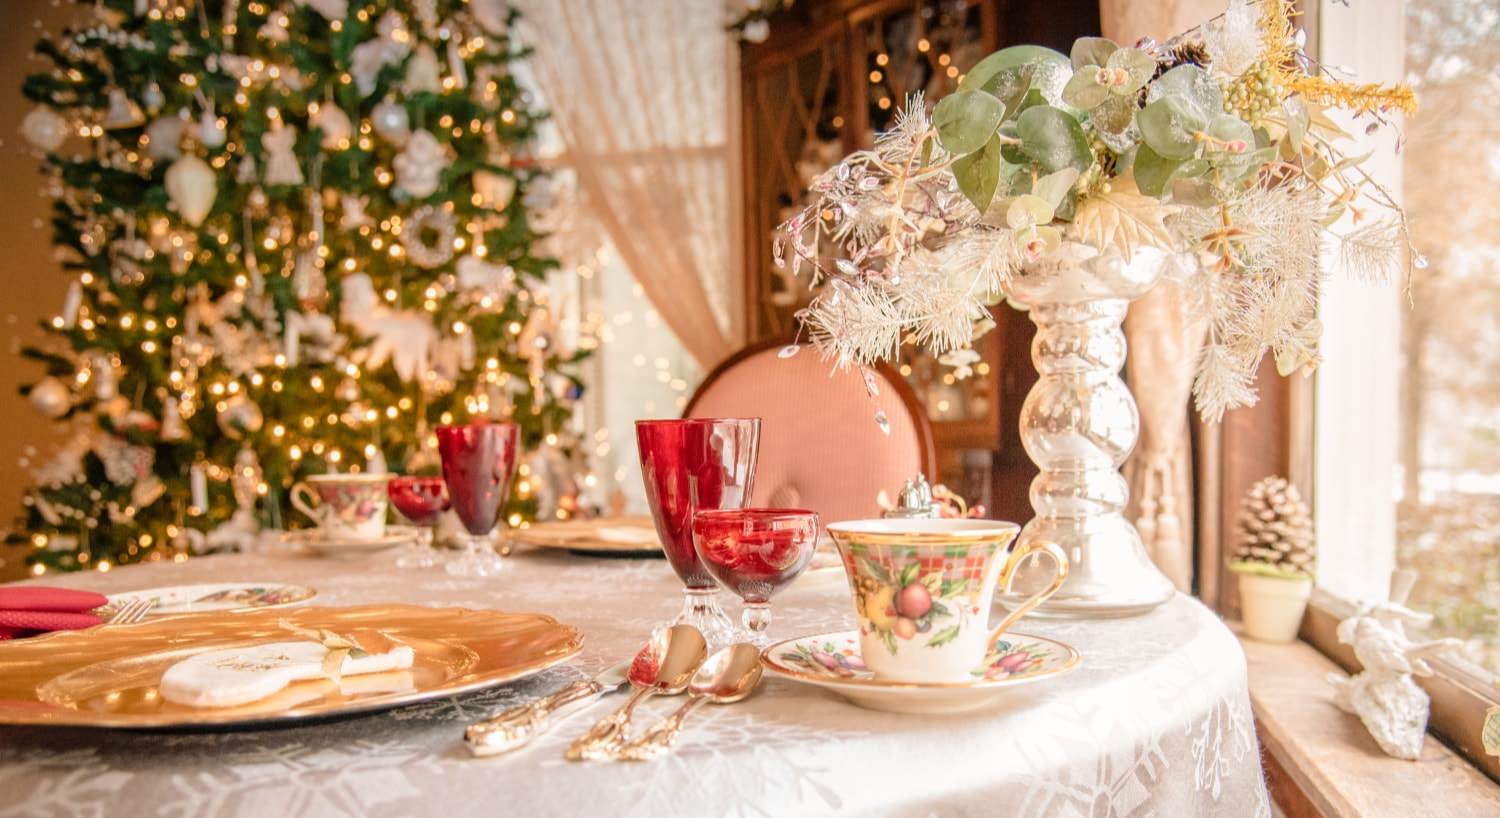 Table set with fine china place settings, white snowflake tablecloth, and decorated Christmas tree in the background